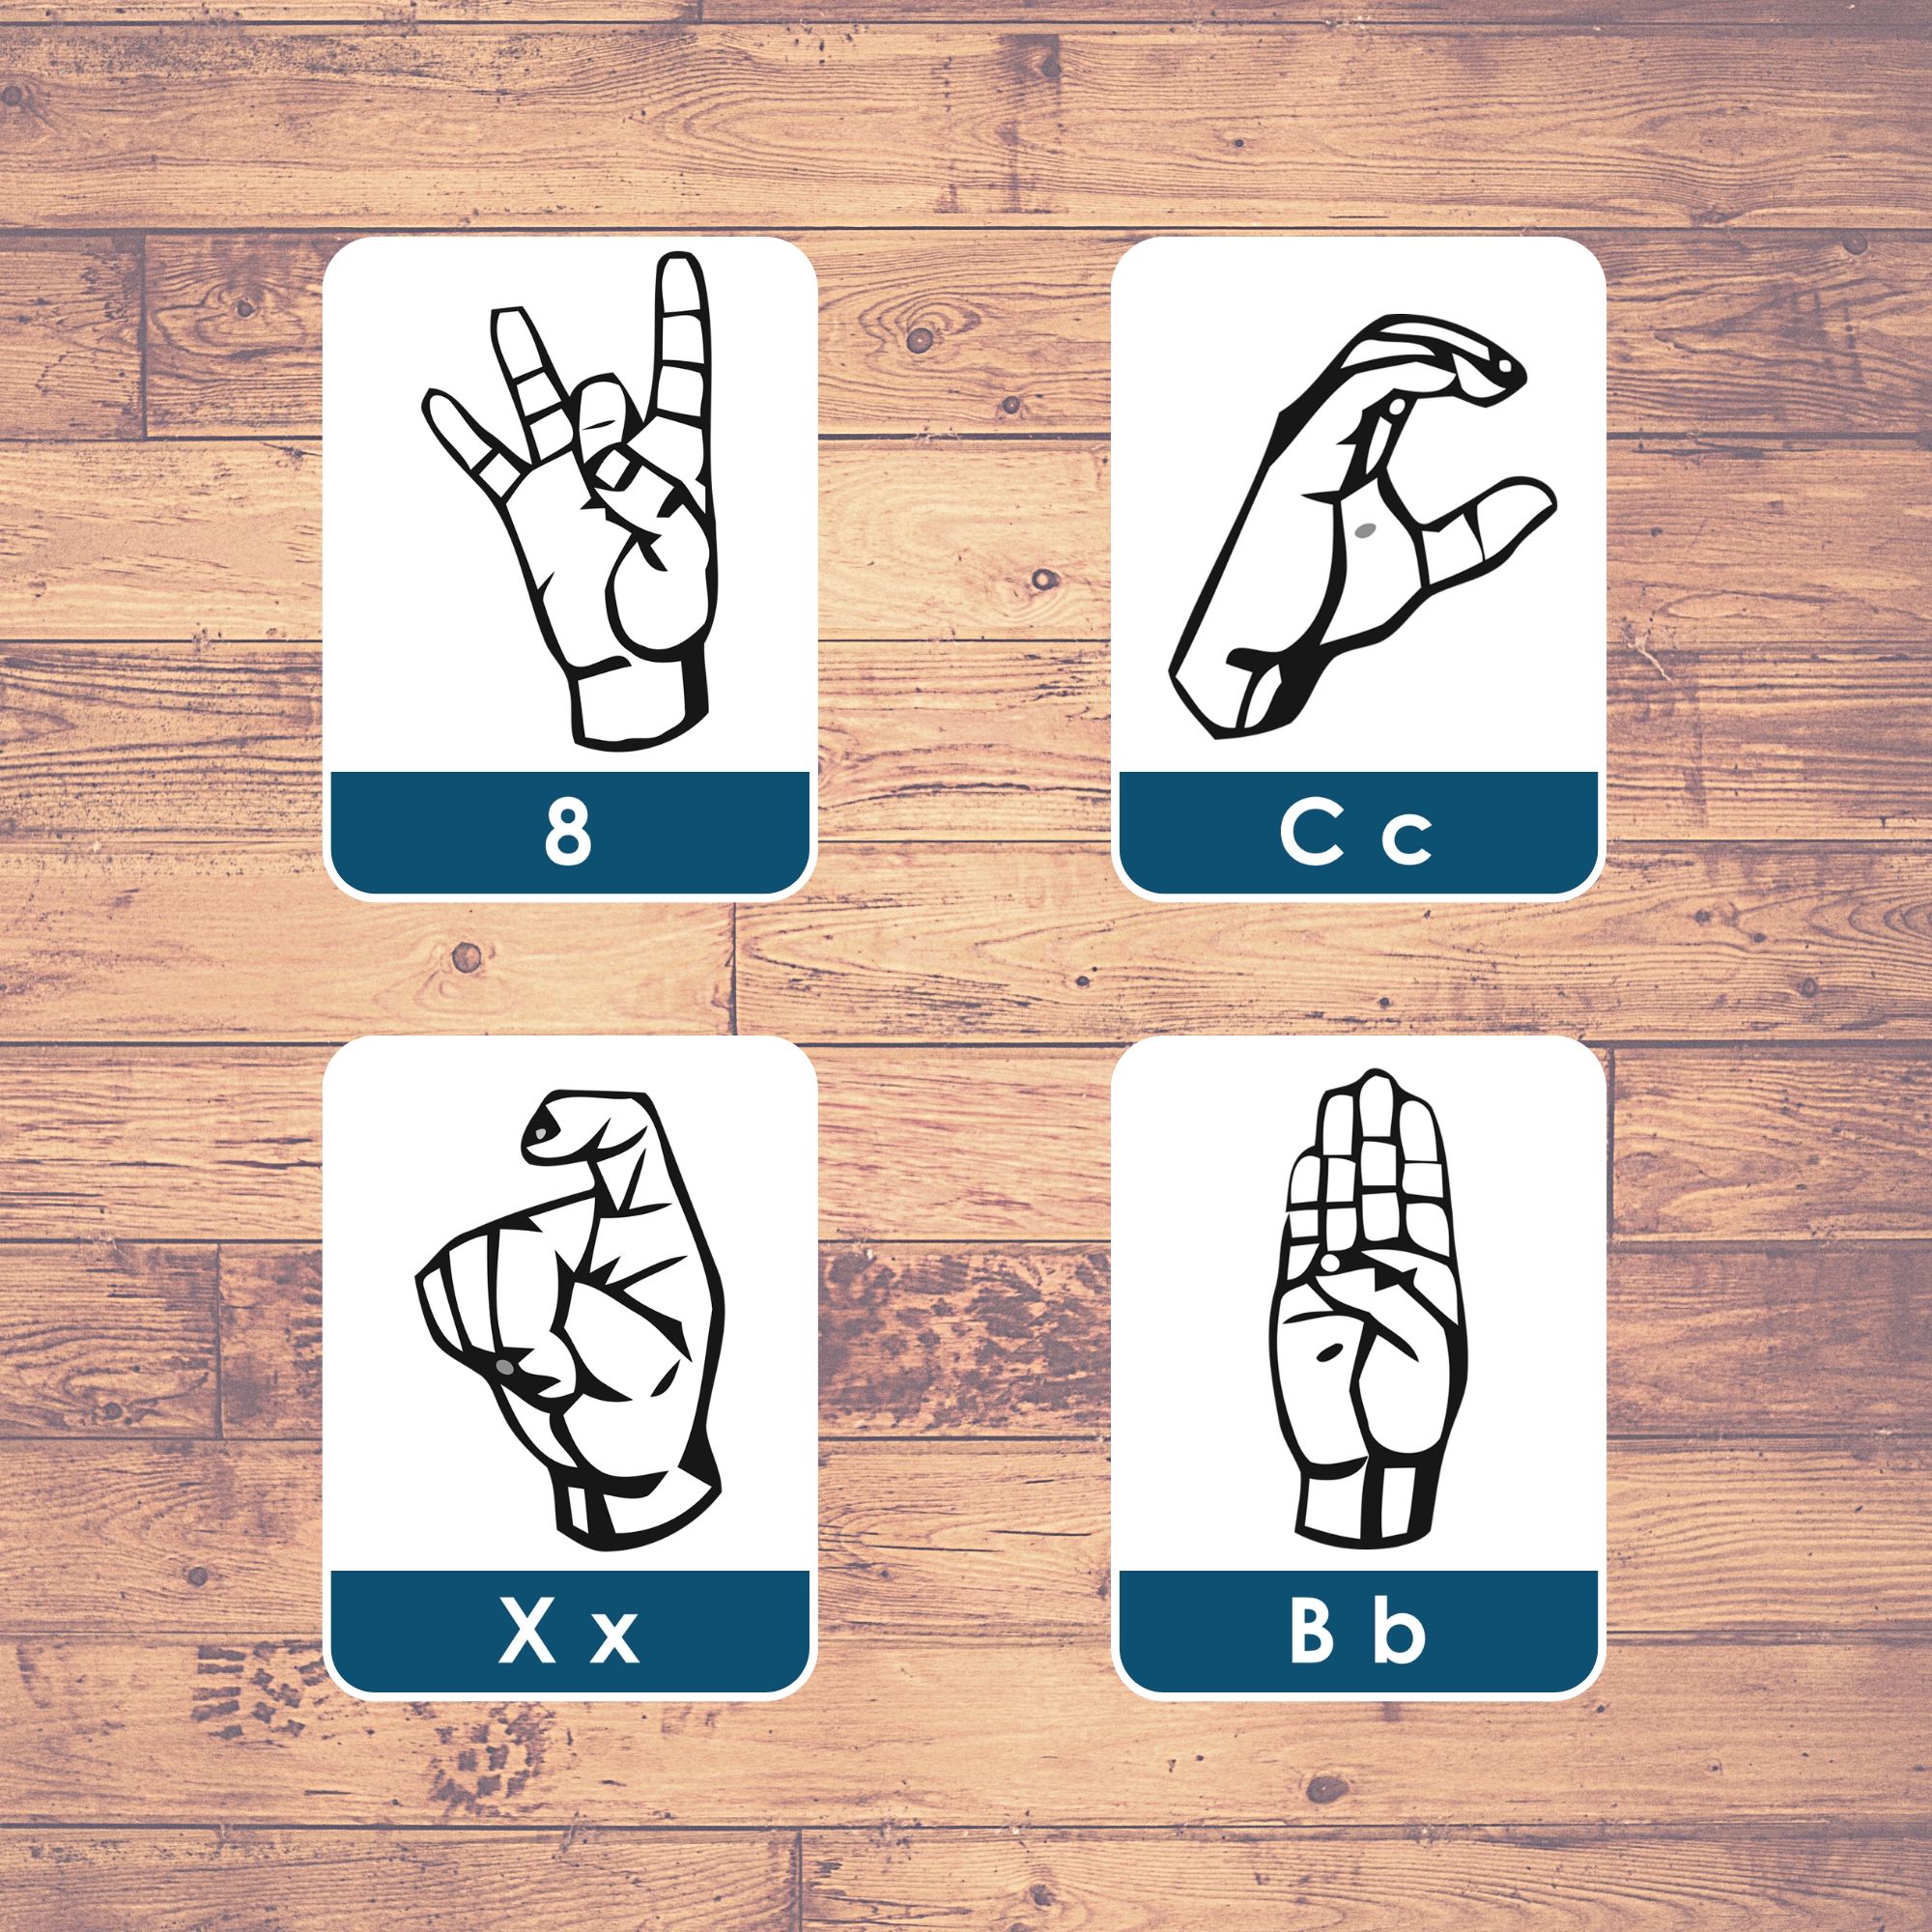 sign-language-flashcards-educational-three-part-cards-learning